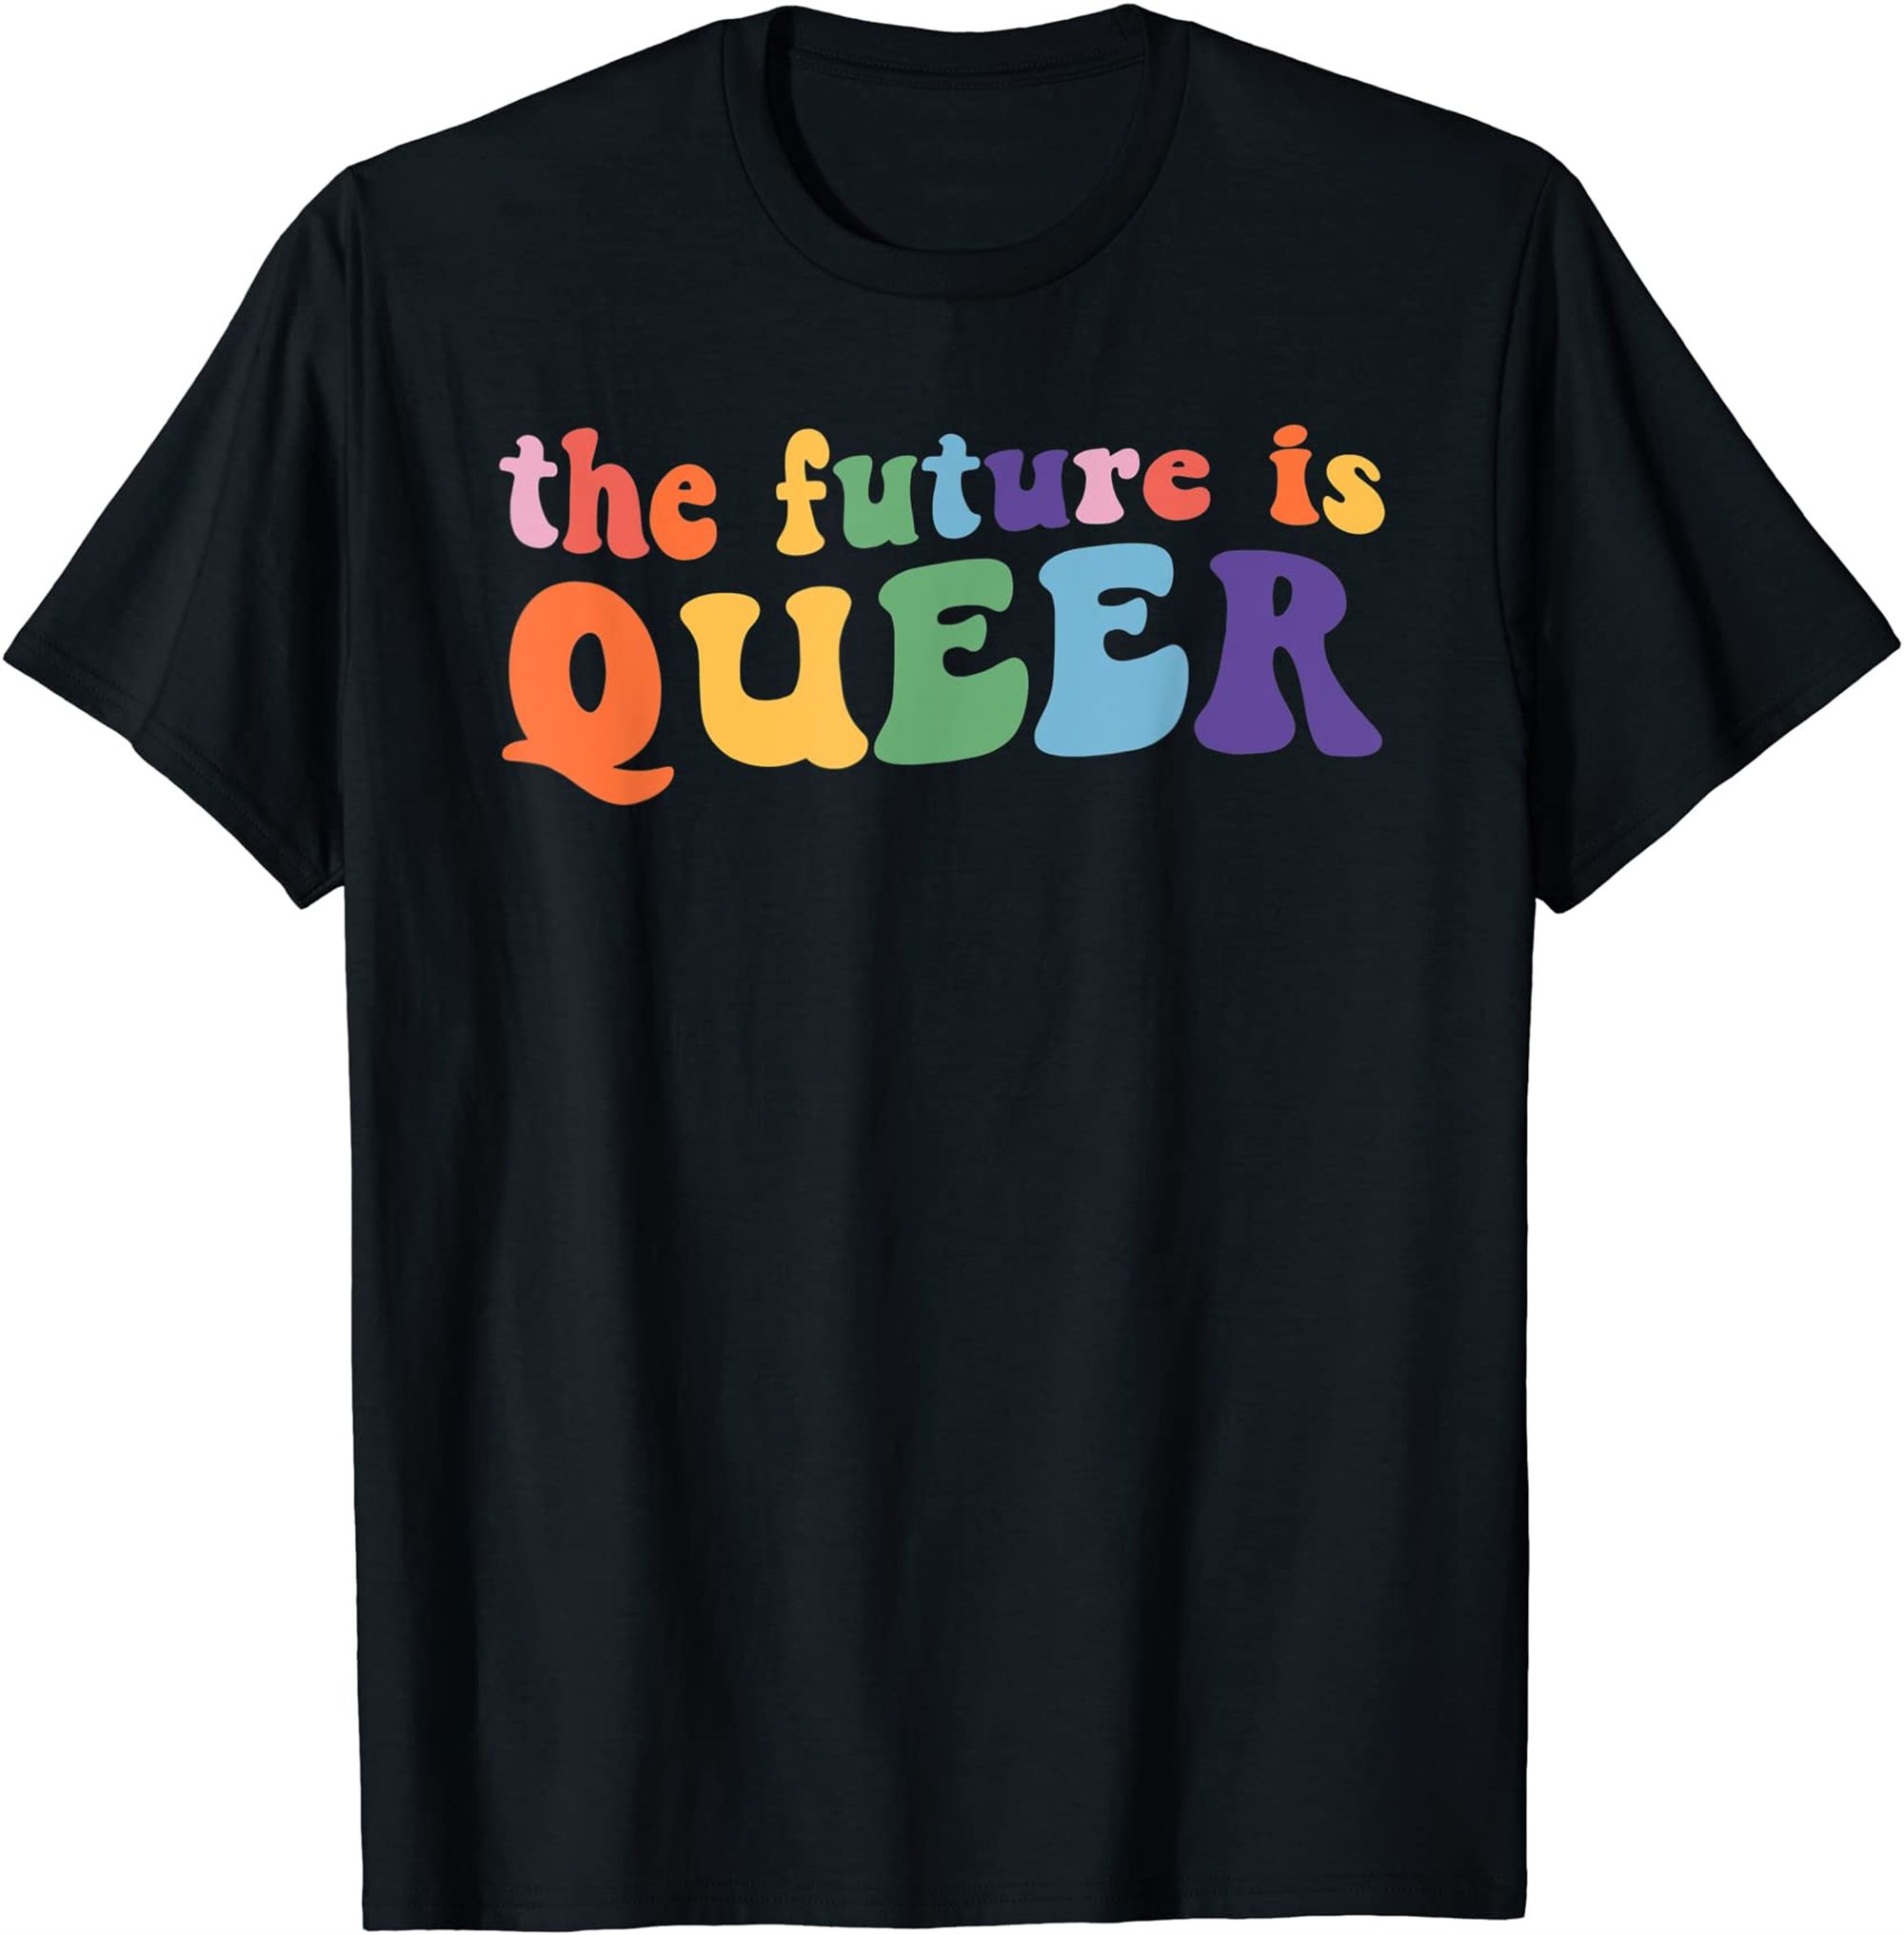 Retro Groovy The Future Is Queer Pride Lesbian Gay Lgbtq T-shirt Plus Size Up To 5xl